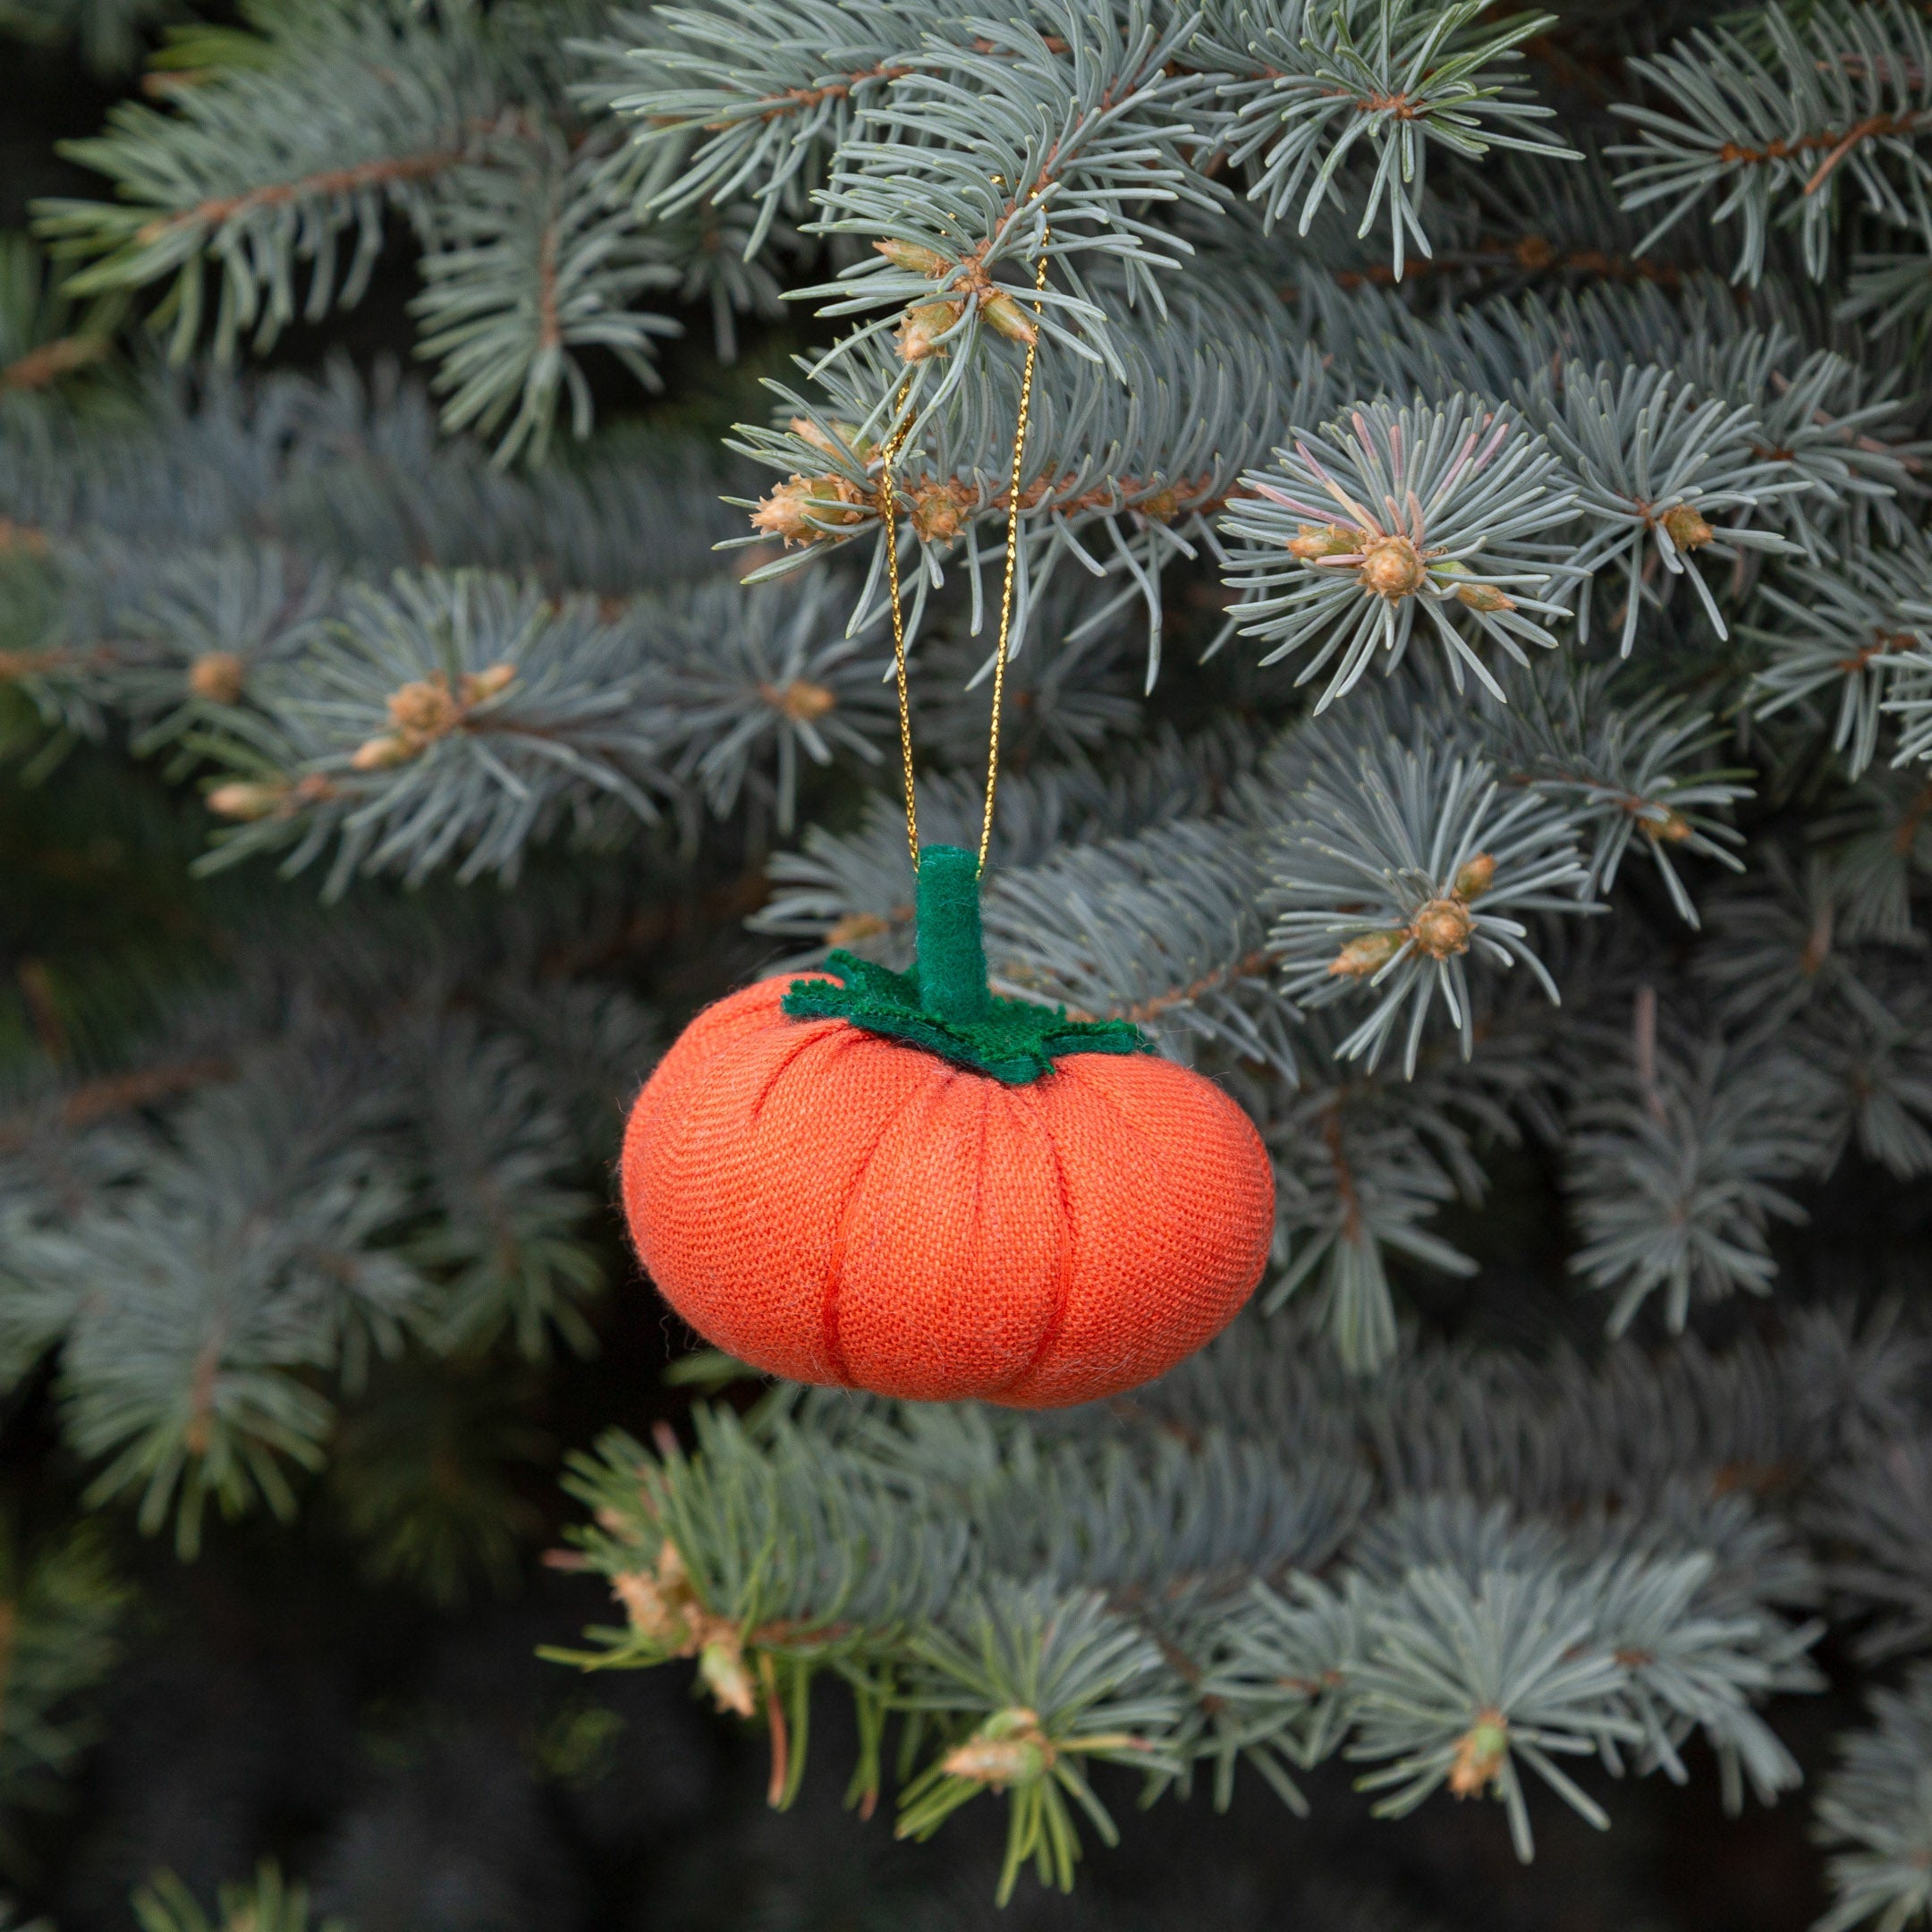 Delightful Handcrafted Fair Trade Organic Cloth Pumpkin Ornament: A Touch of Autumn Charm for Your Home**